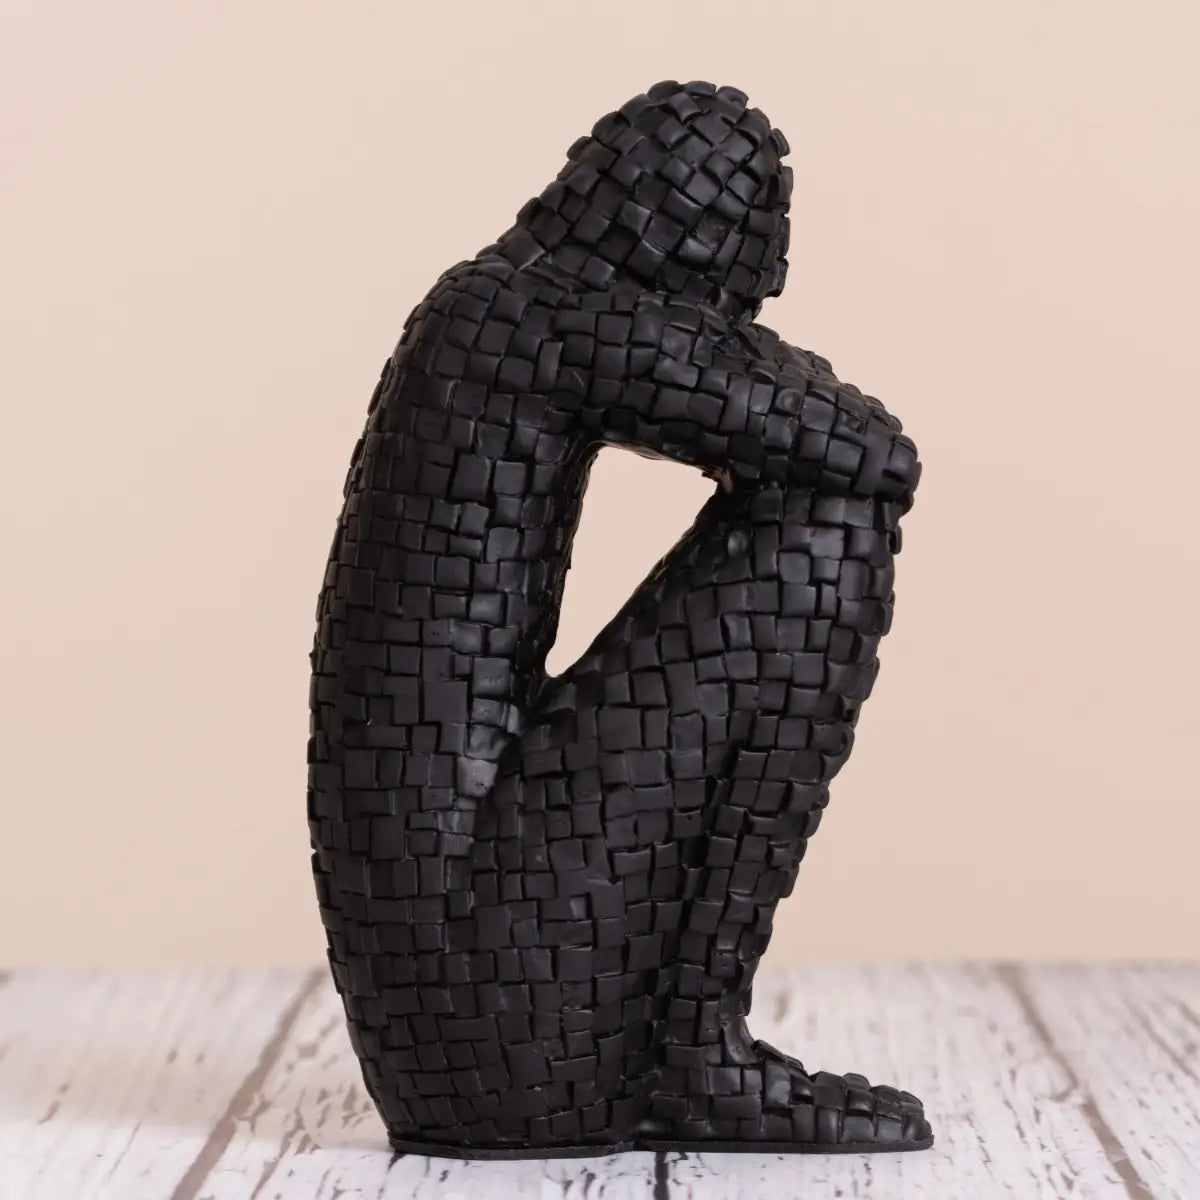 Midnight Muse Thinker Man Figurine For Home Decor